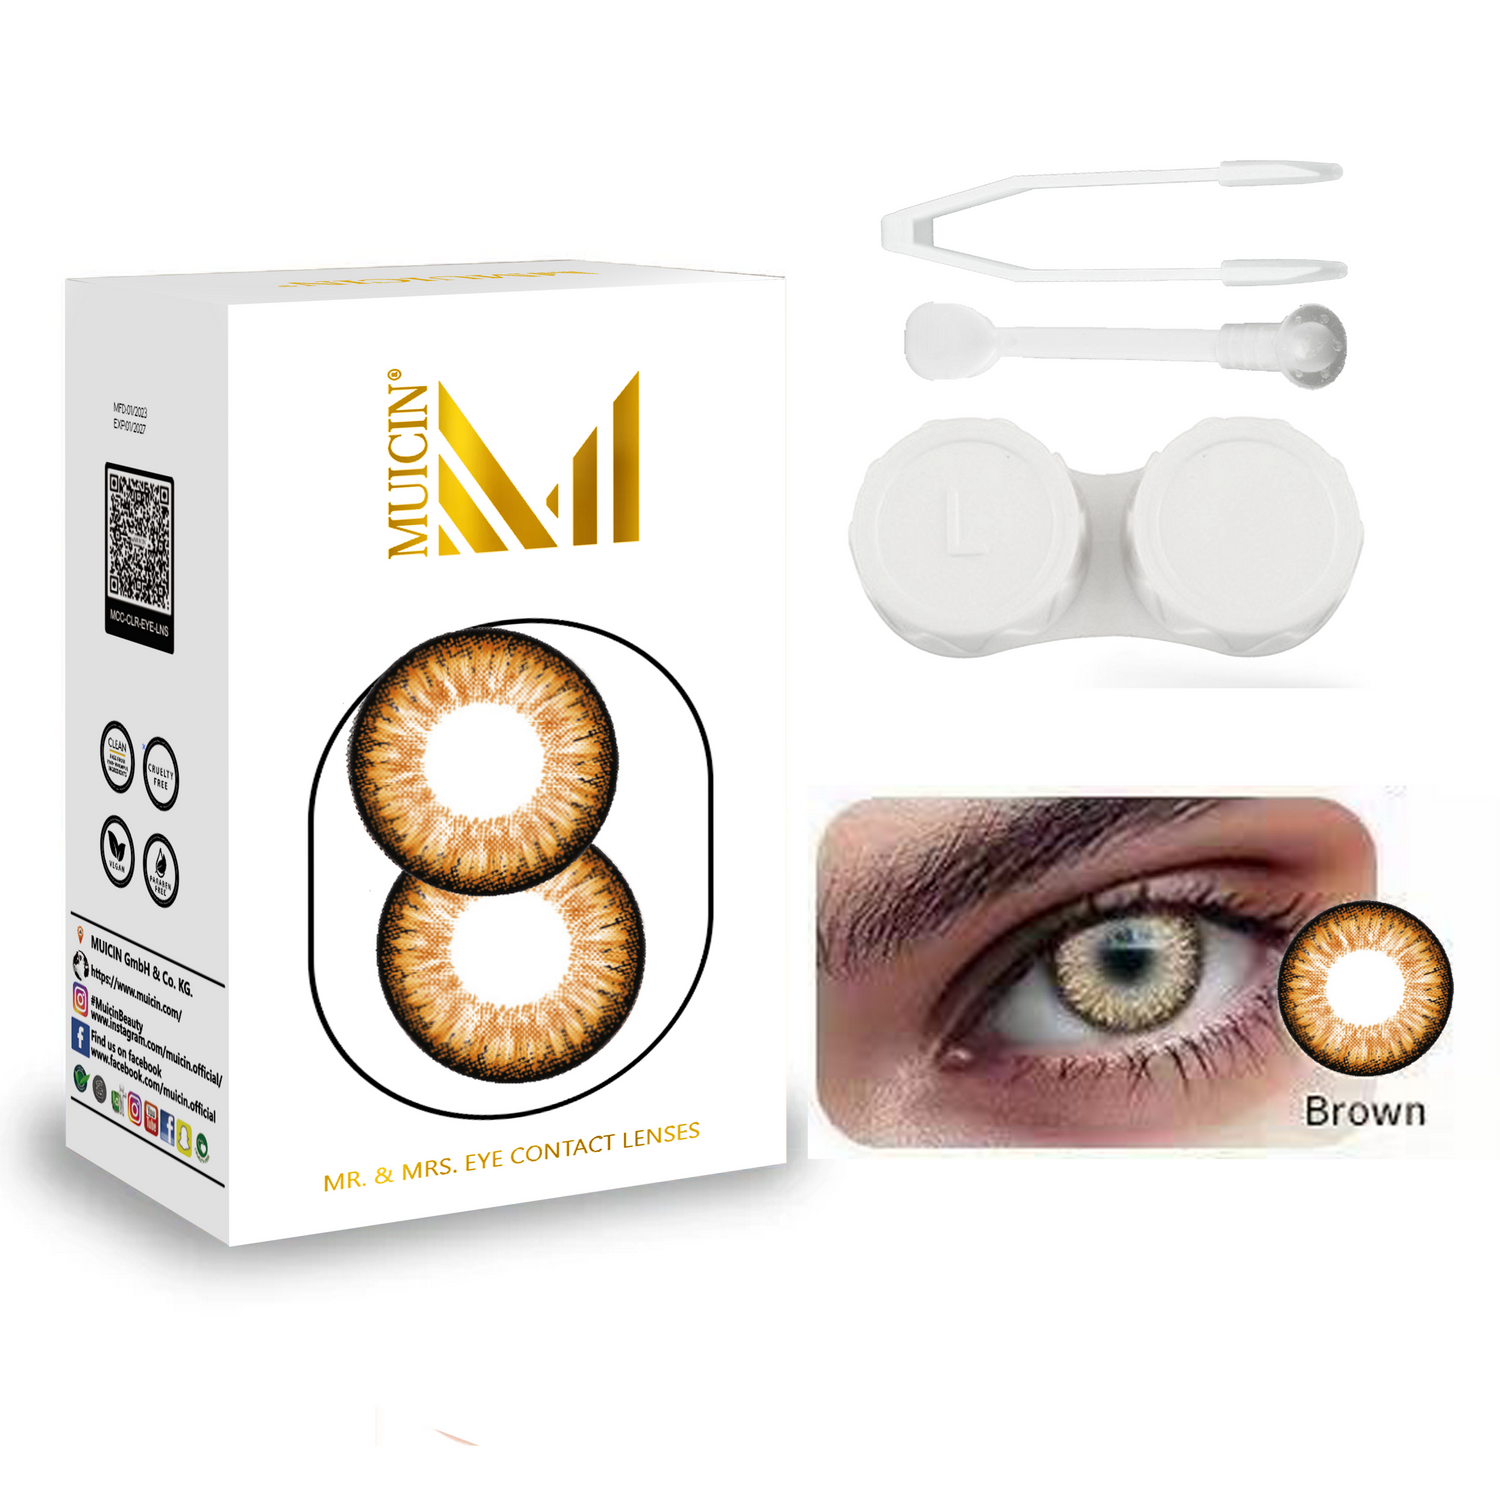 Buy  MUICIN - Mr & mrs party wear colored eye contacts - vibrant eye transformation - Brown at Best Price Online in Pakistan